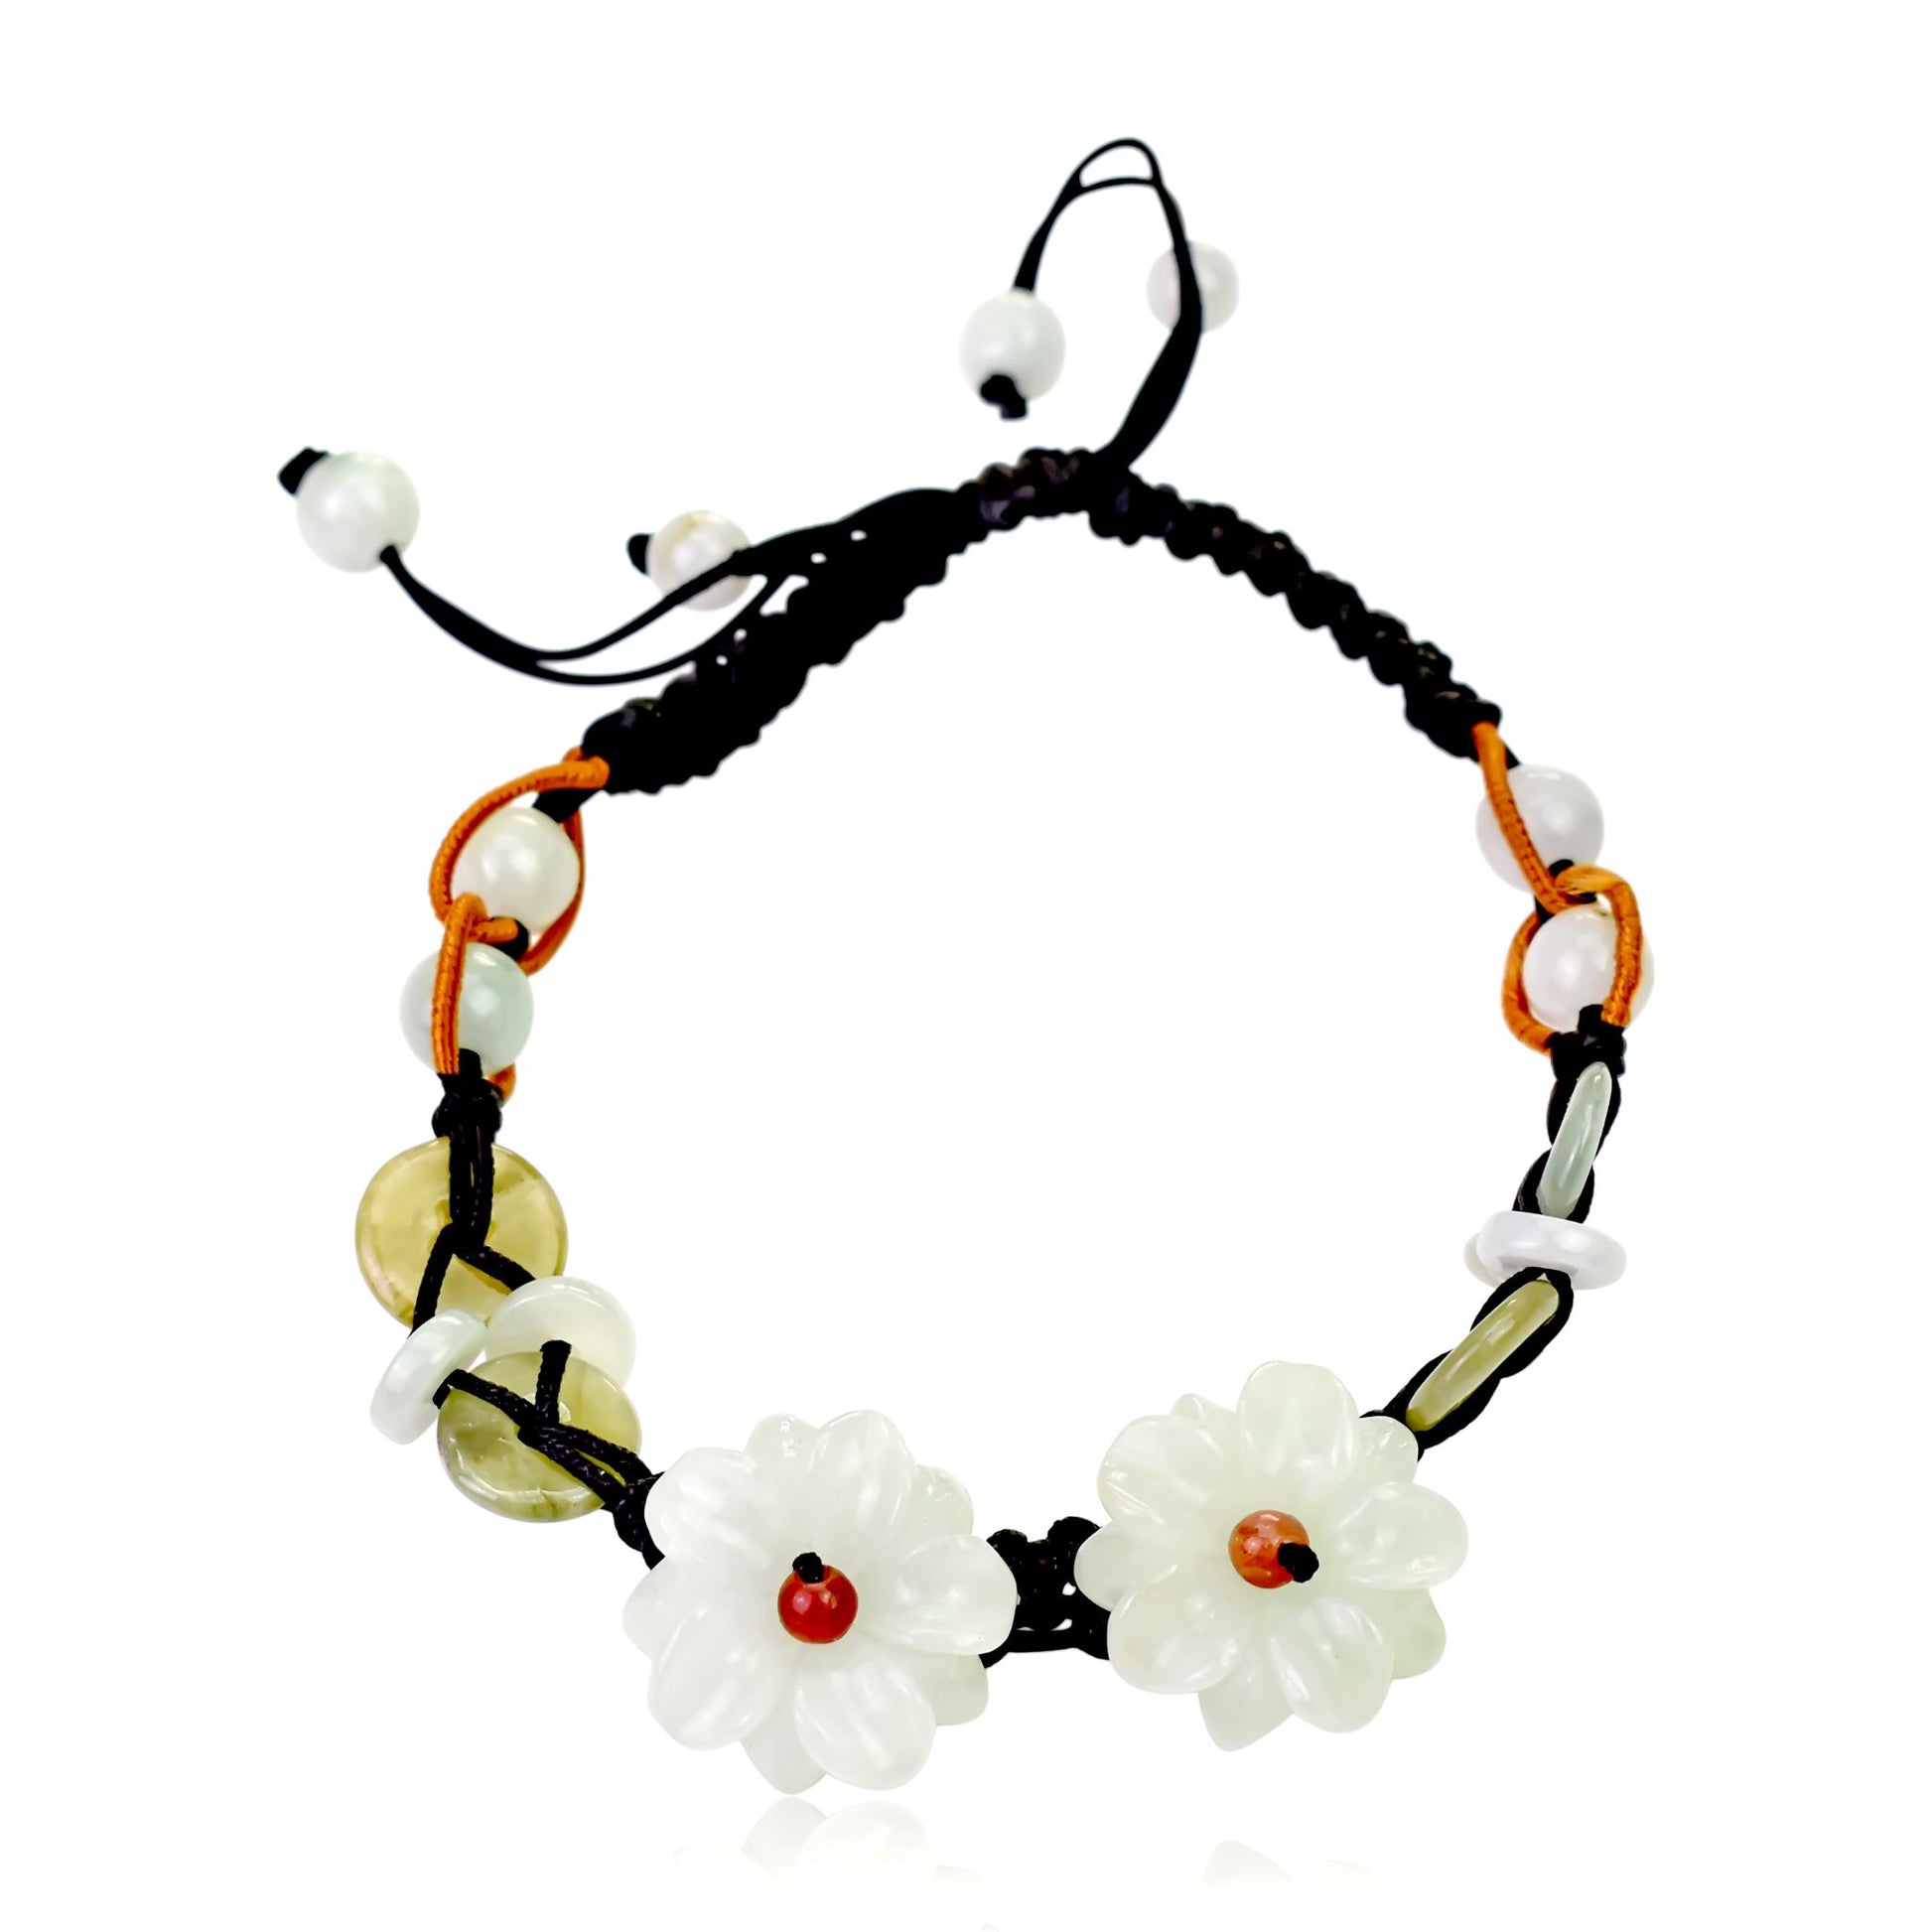 Be Uniquely Stylish with the Double Mums Adjustable Charm Bracelet made with Black Cord